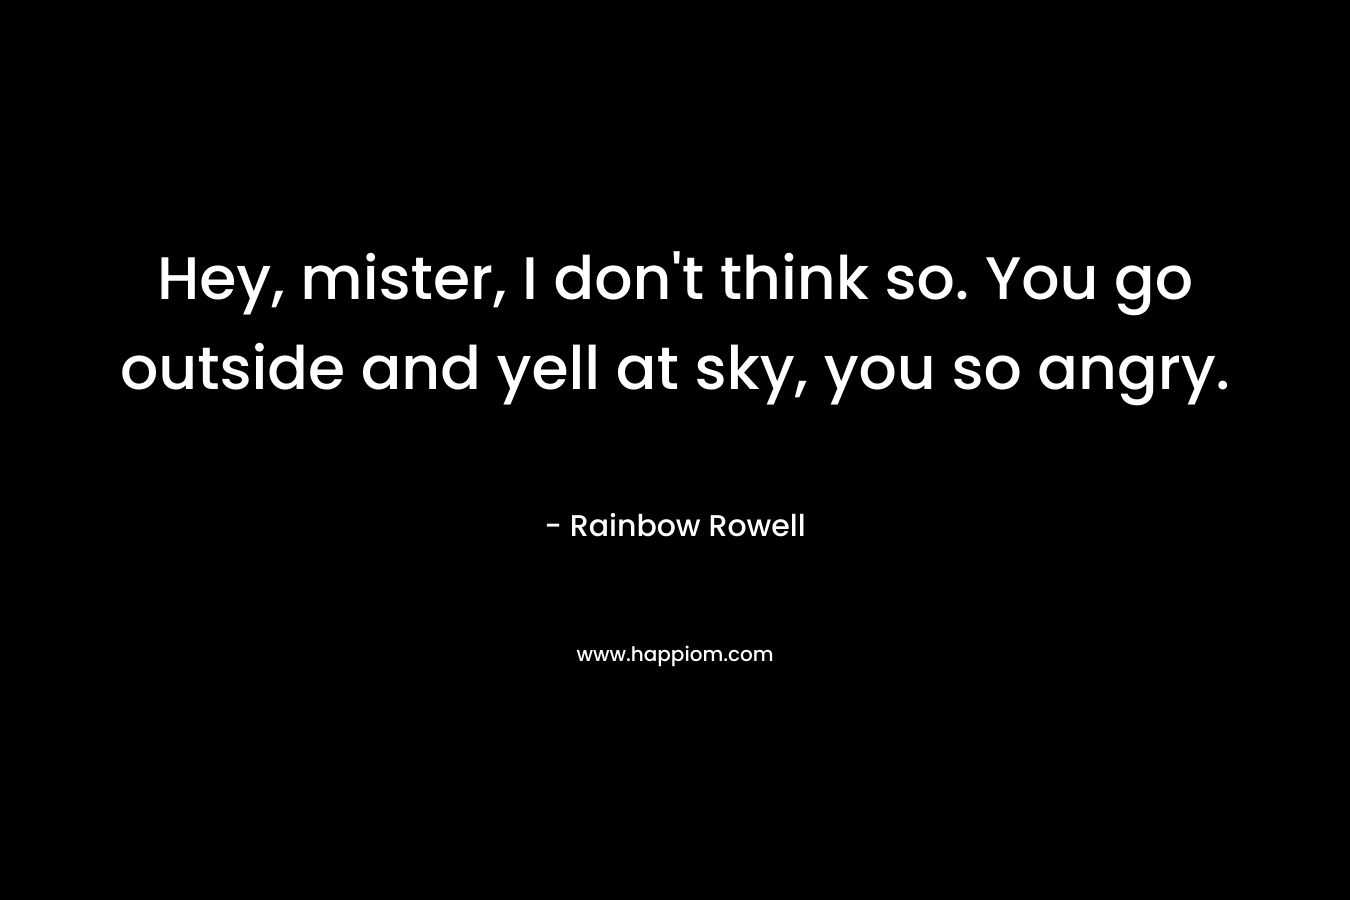 Hey, mister, I don’t think so. You go outside and yell at sky, you so angry. – Rainbow Rowell